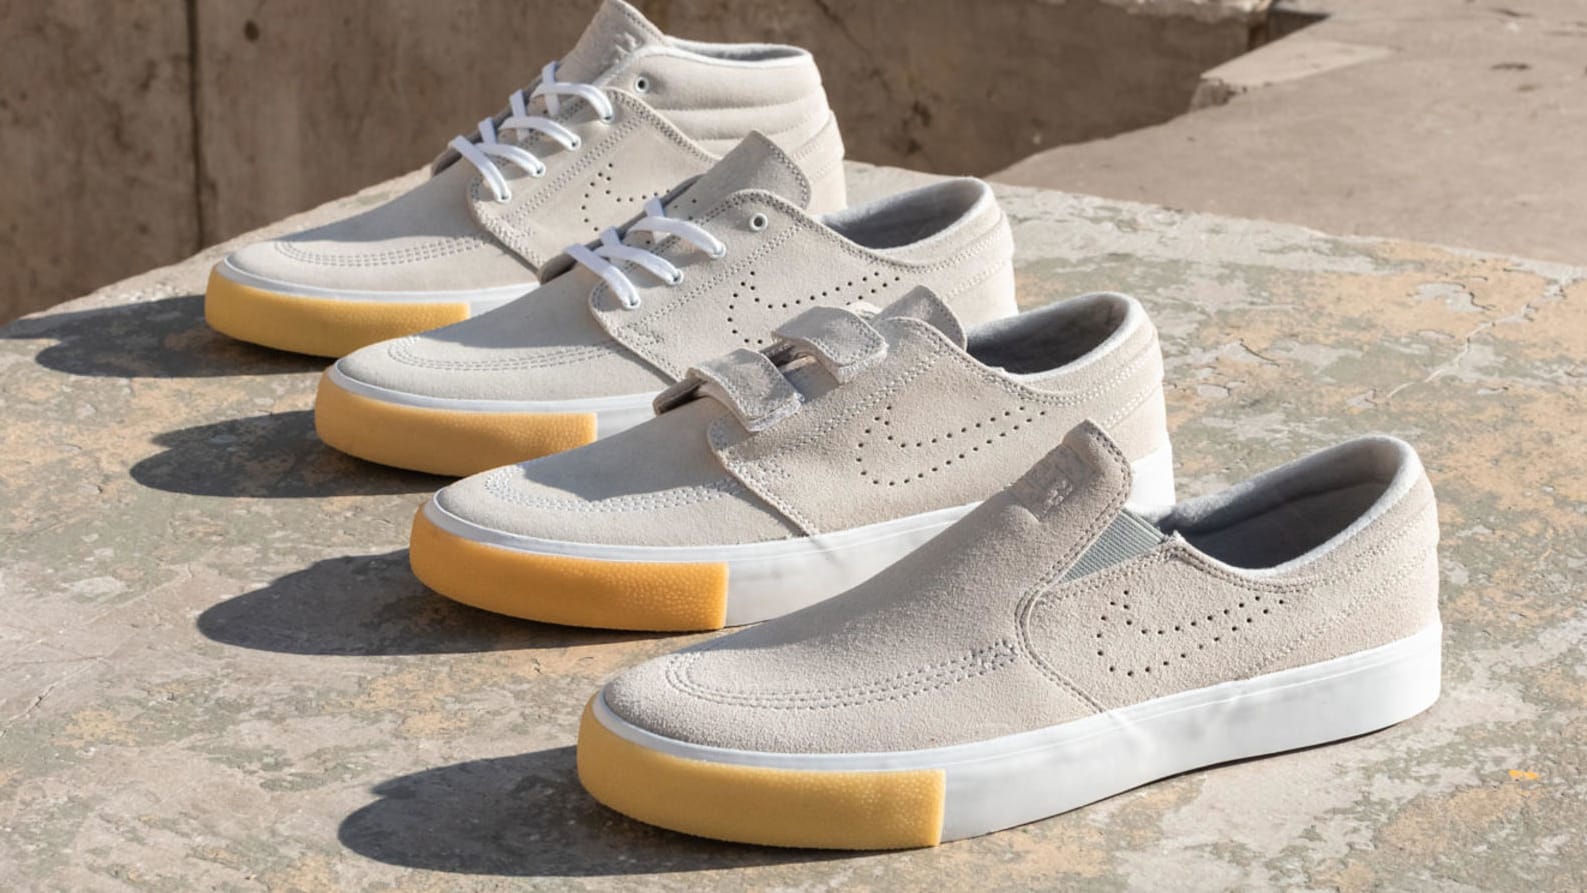 Nike SB Zoom Stefan Janoski Remastered (RM) Collection Release 